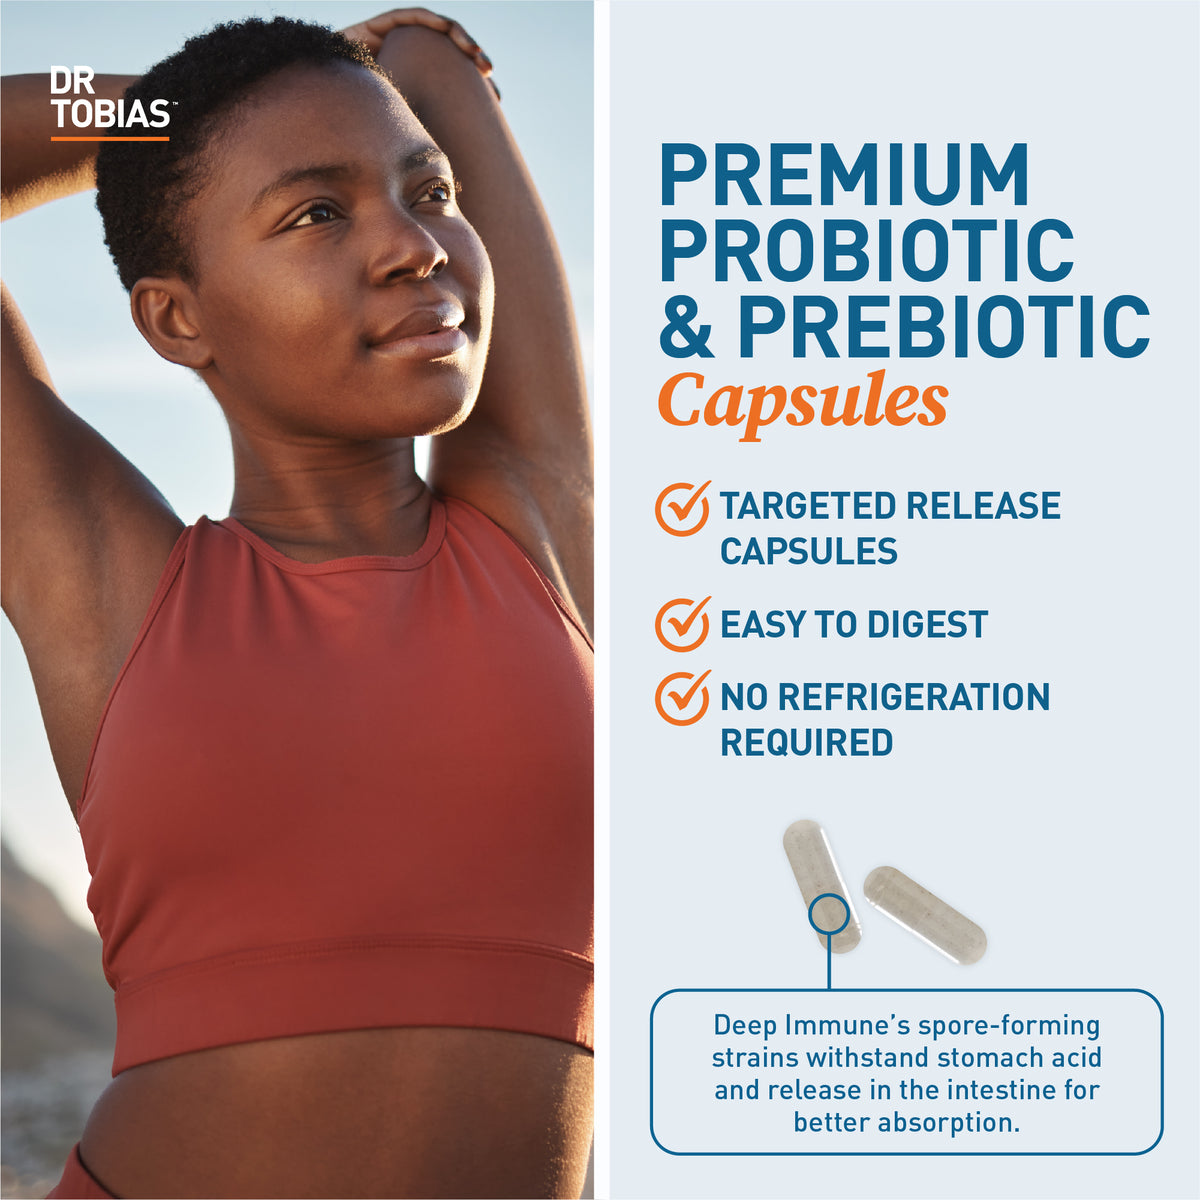 premium probiotic and prebiotic capsule have a targeted release, are easy to digest and they do not require refrigeration. 